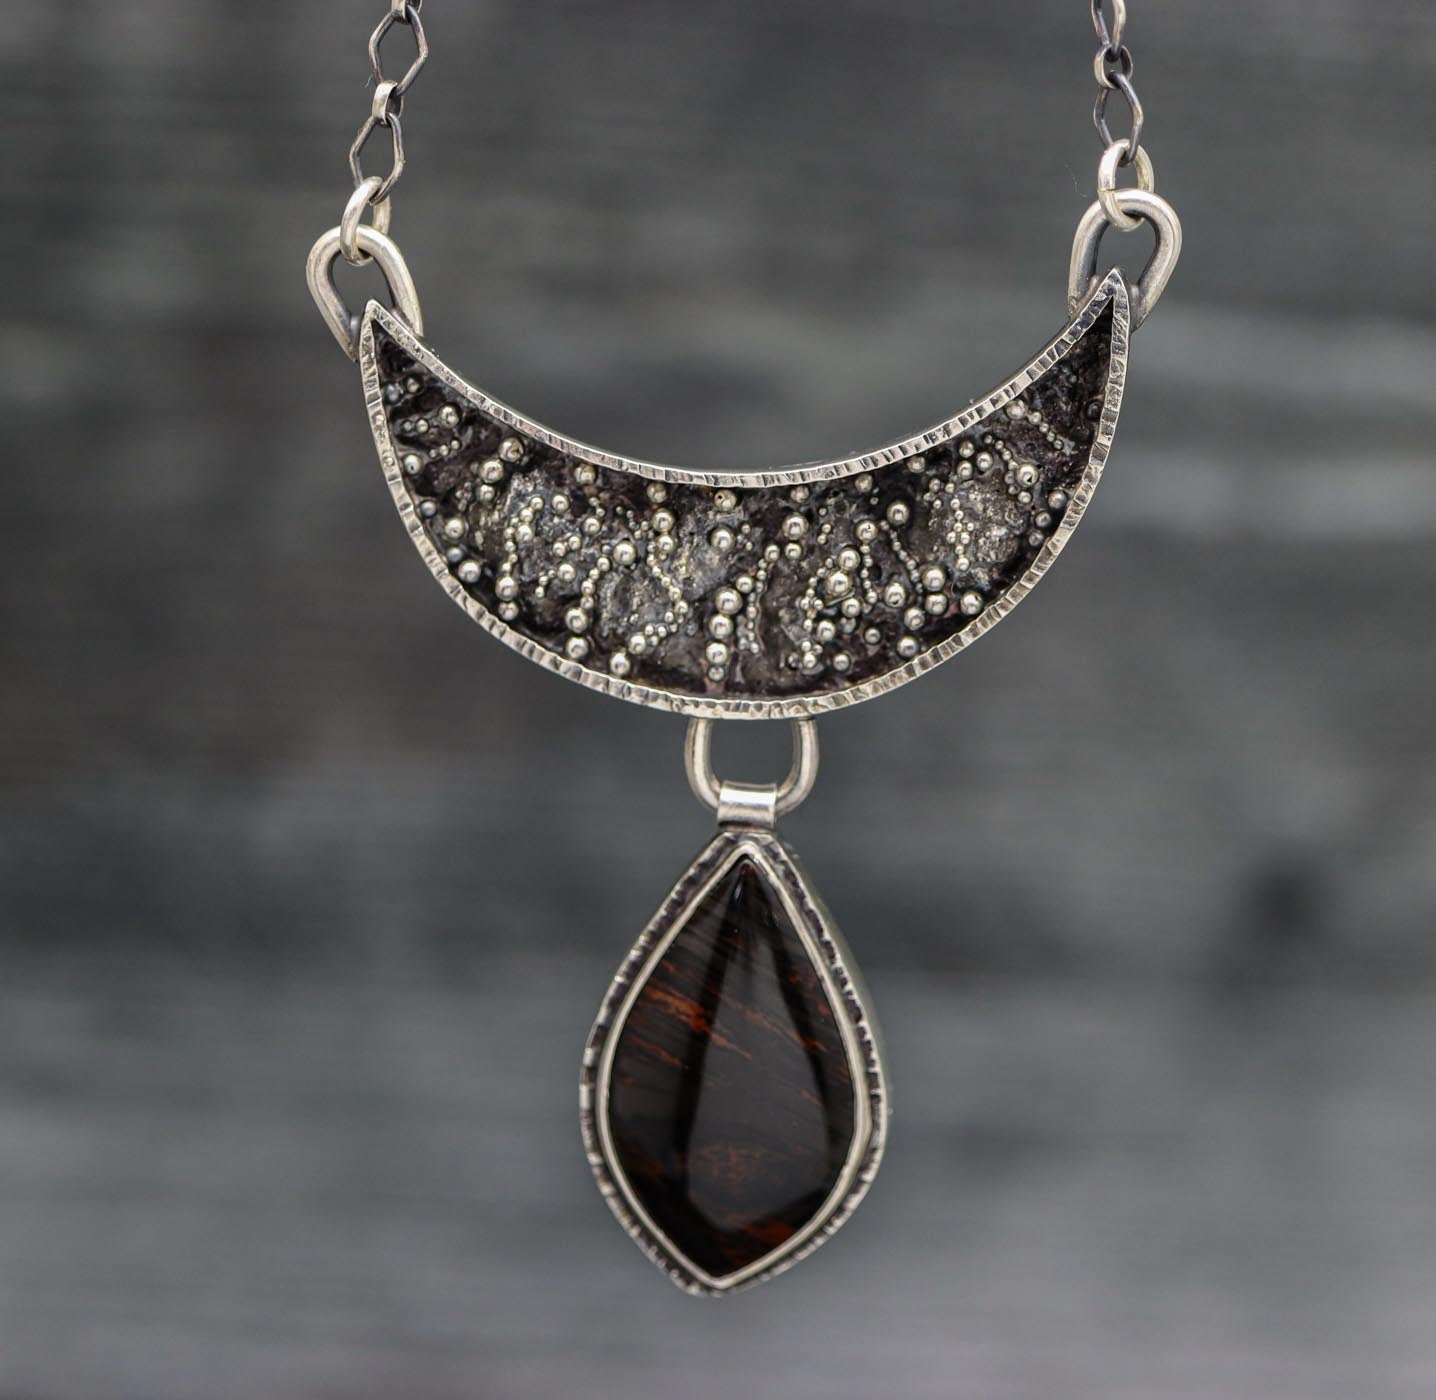 Mahogany Obsidian Crescent Pendant Sterling Silver Necklace